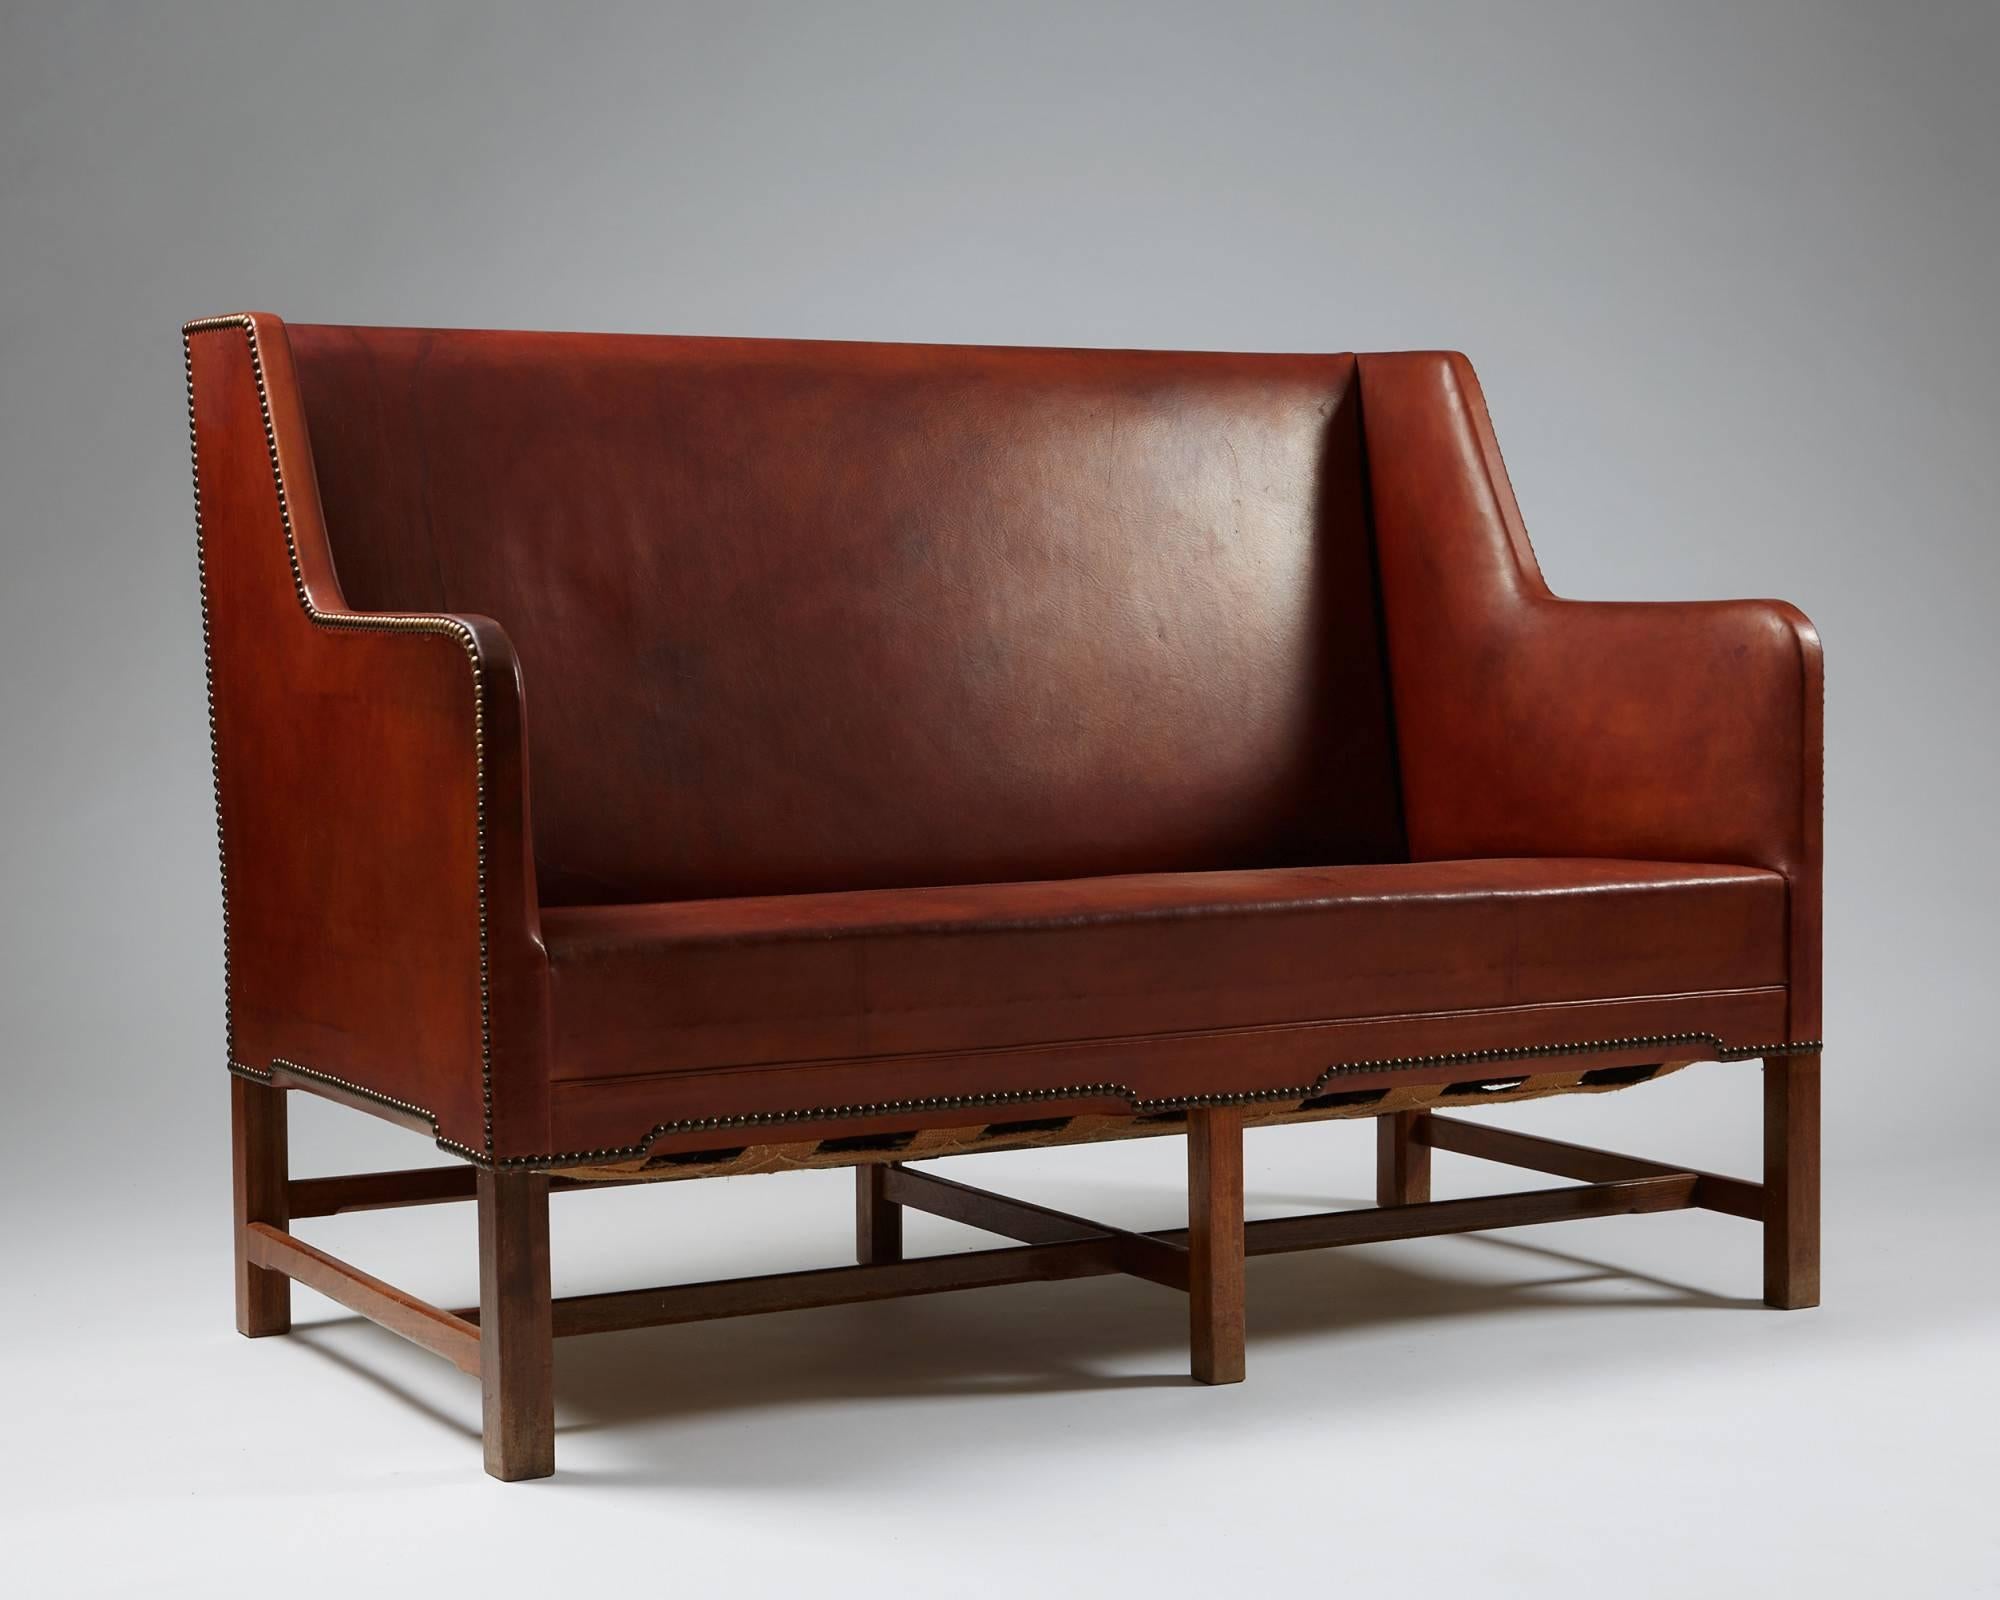 Sofa model 5011 designed by Kaare Klint for Rud Rasmussen, Denmark, 1935
Original leather, mahogany and brass. Back covered in original canvas.

H: 92 cm/ 3' 
L: 132 cm/ 4' 4''
D: 65,5 cm/ 26''
Seat height: 41 cm/ 16''